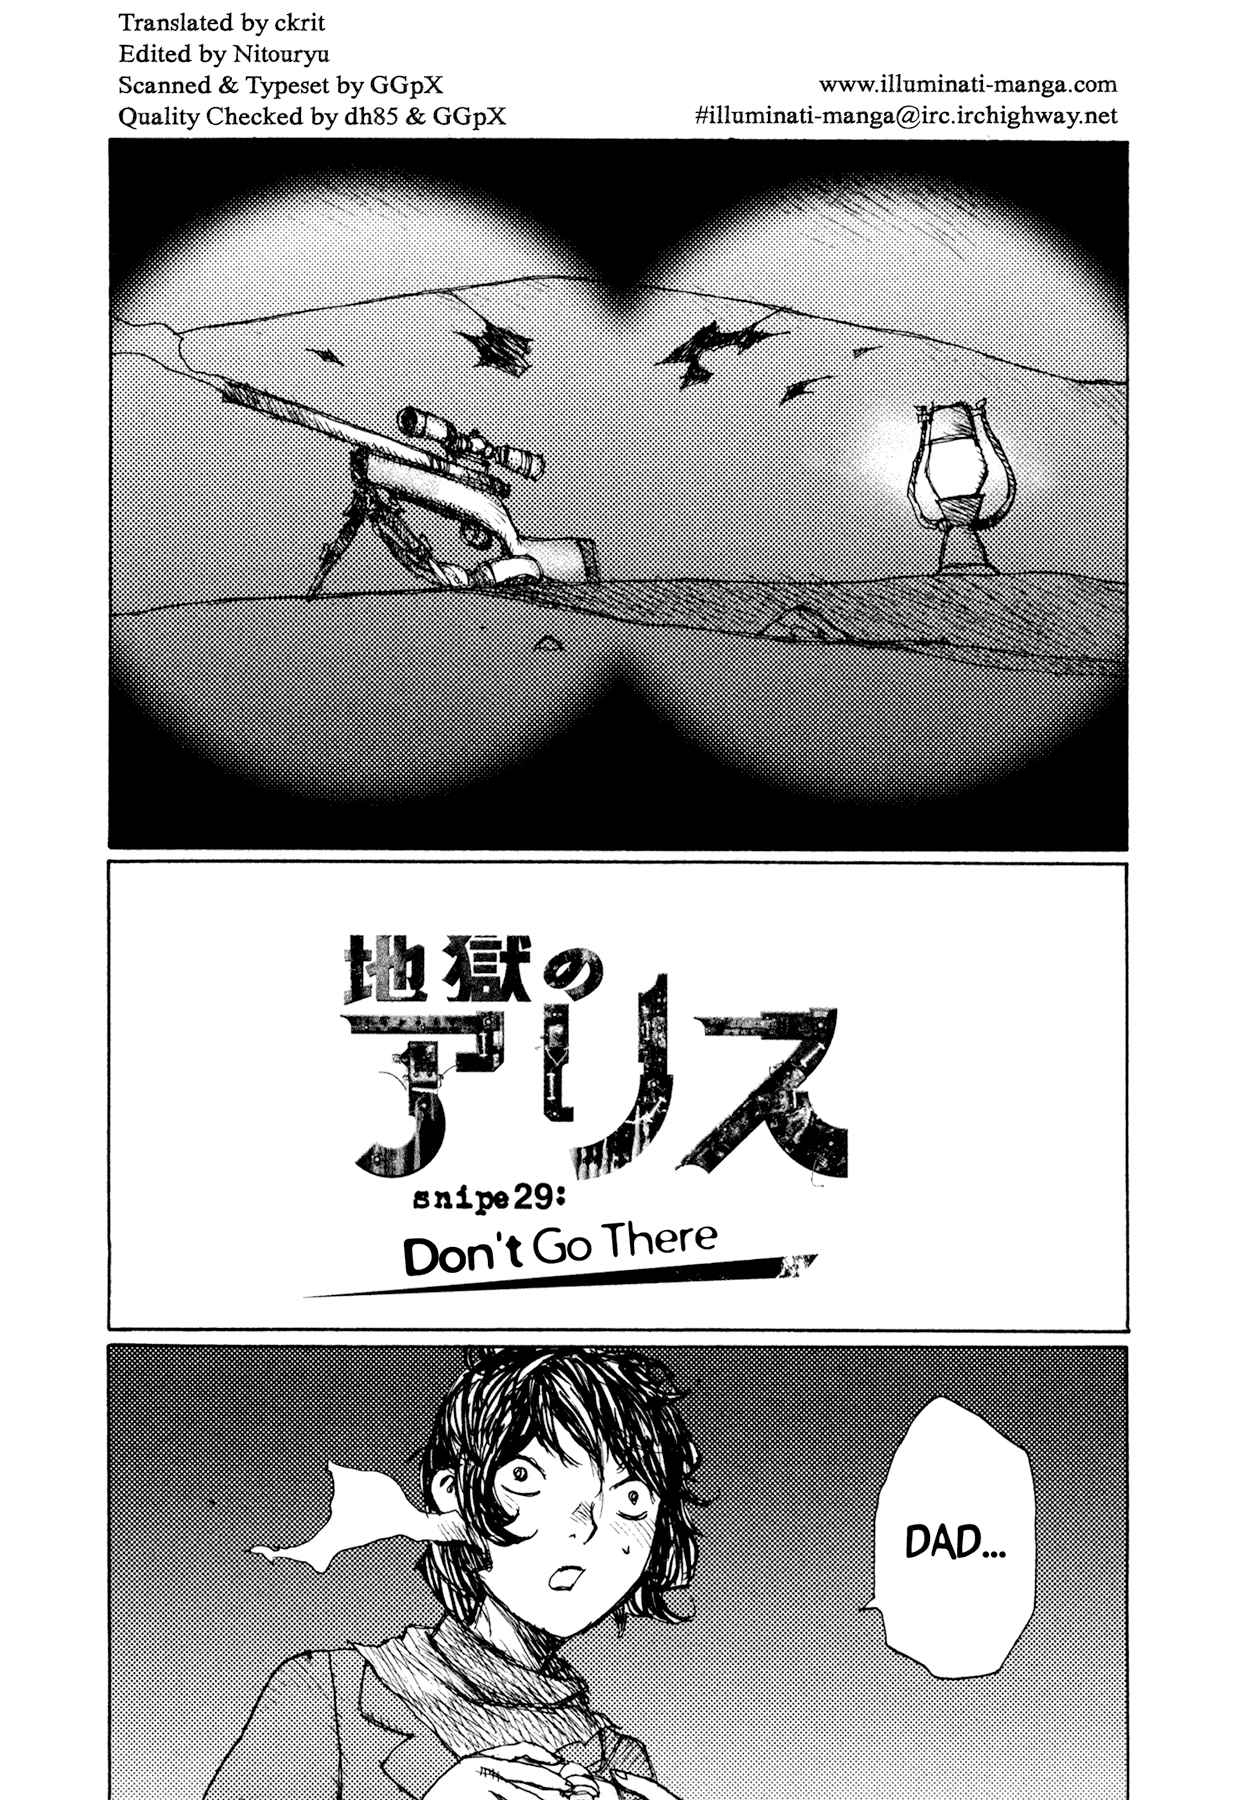 Alice in Hell Vol. 4 Ch. 29 Don't Go There